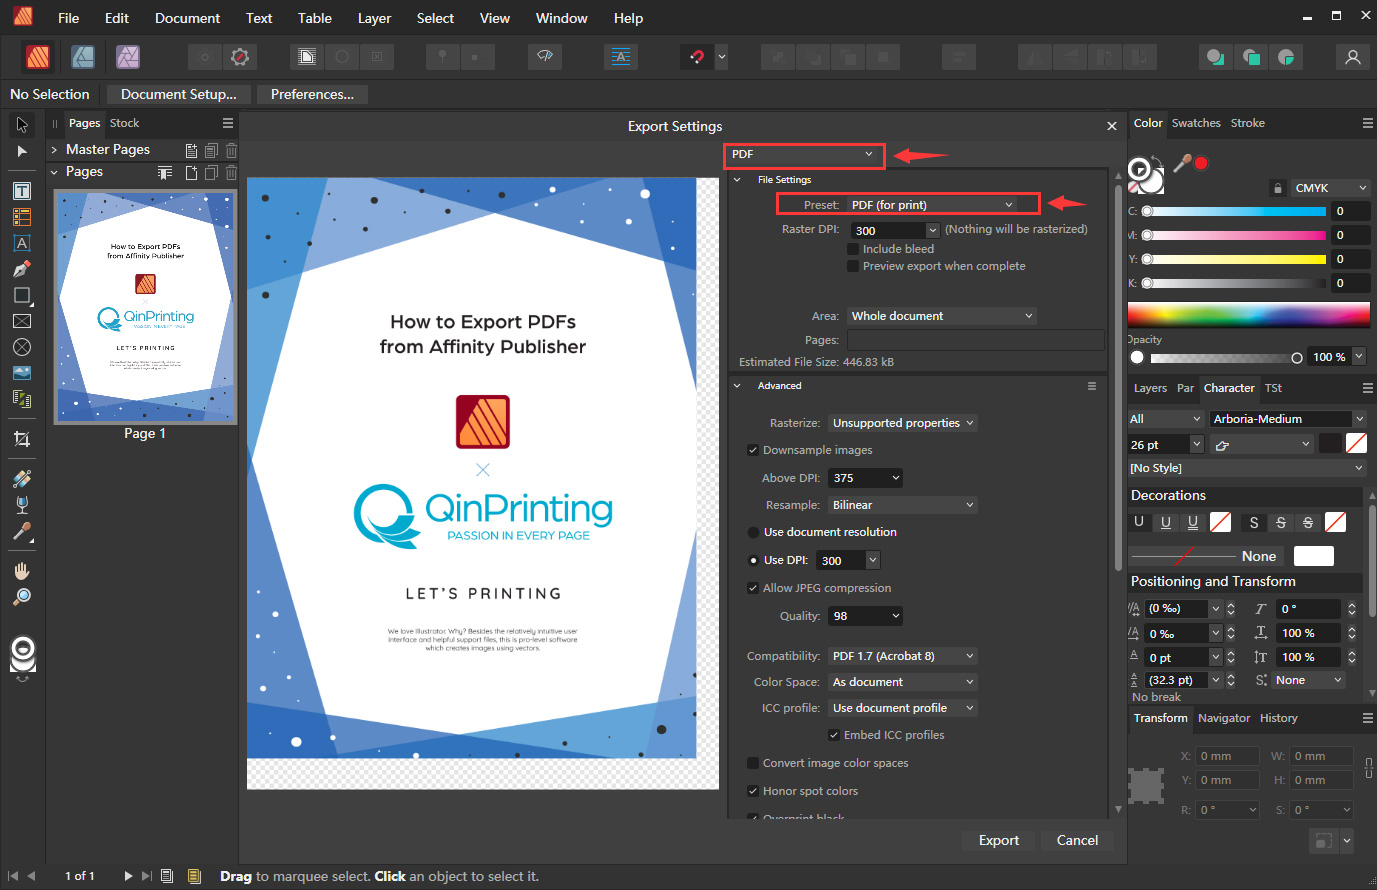 How to Export PDFs from Affinity Publisher Step 2